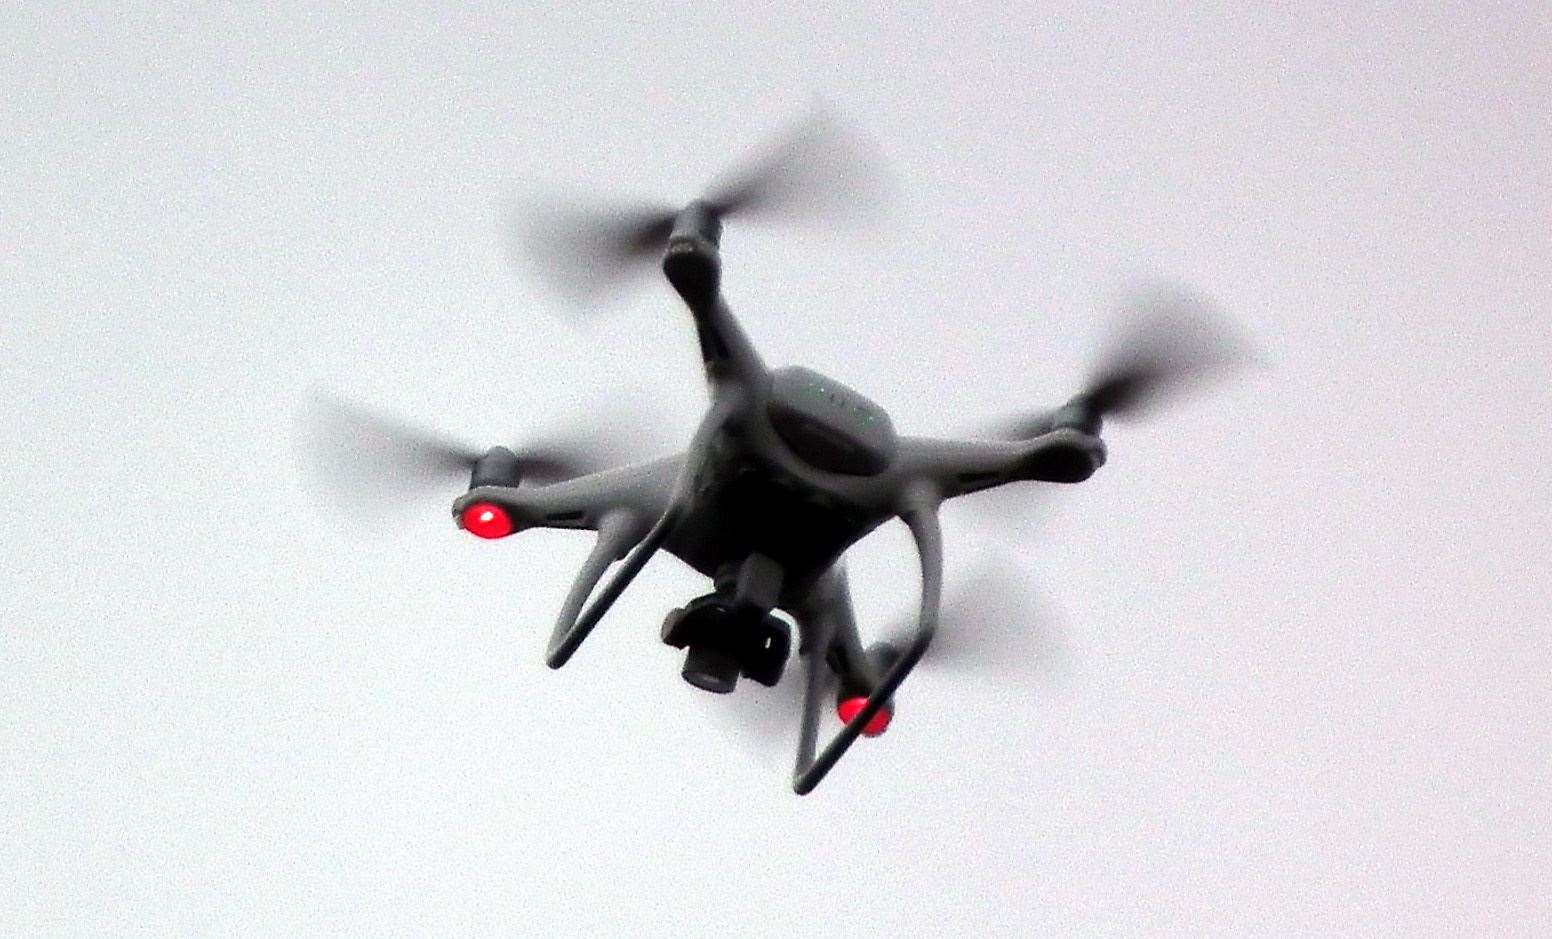 Residents are unhappy following a spate of recent incidents involving a low flying drone in backgardens Photo: Suffolk Police